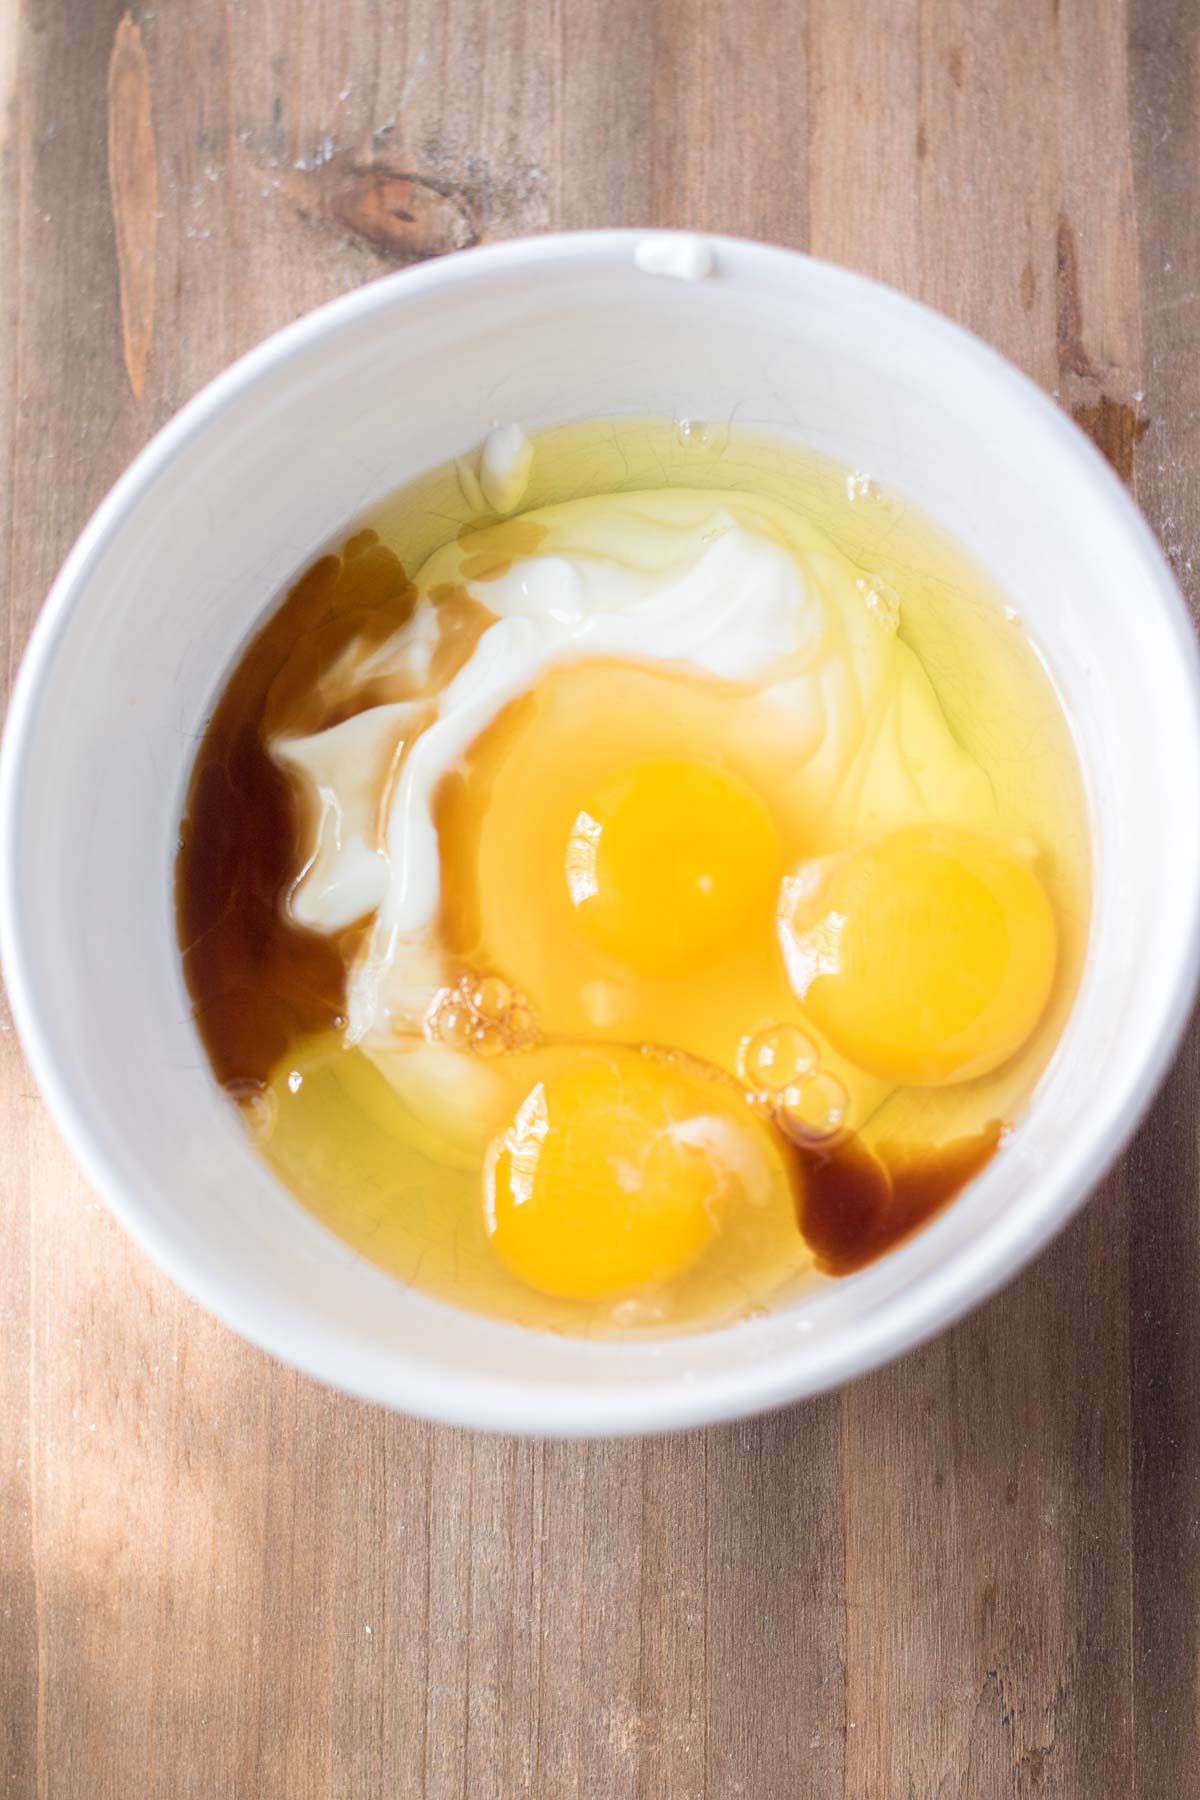 eggs and other wet ingredients in a while bowl